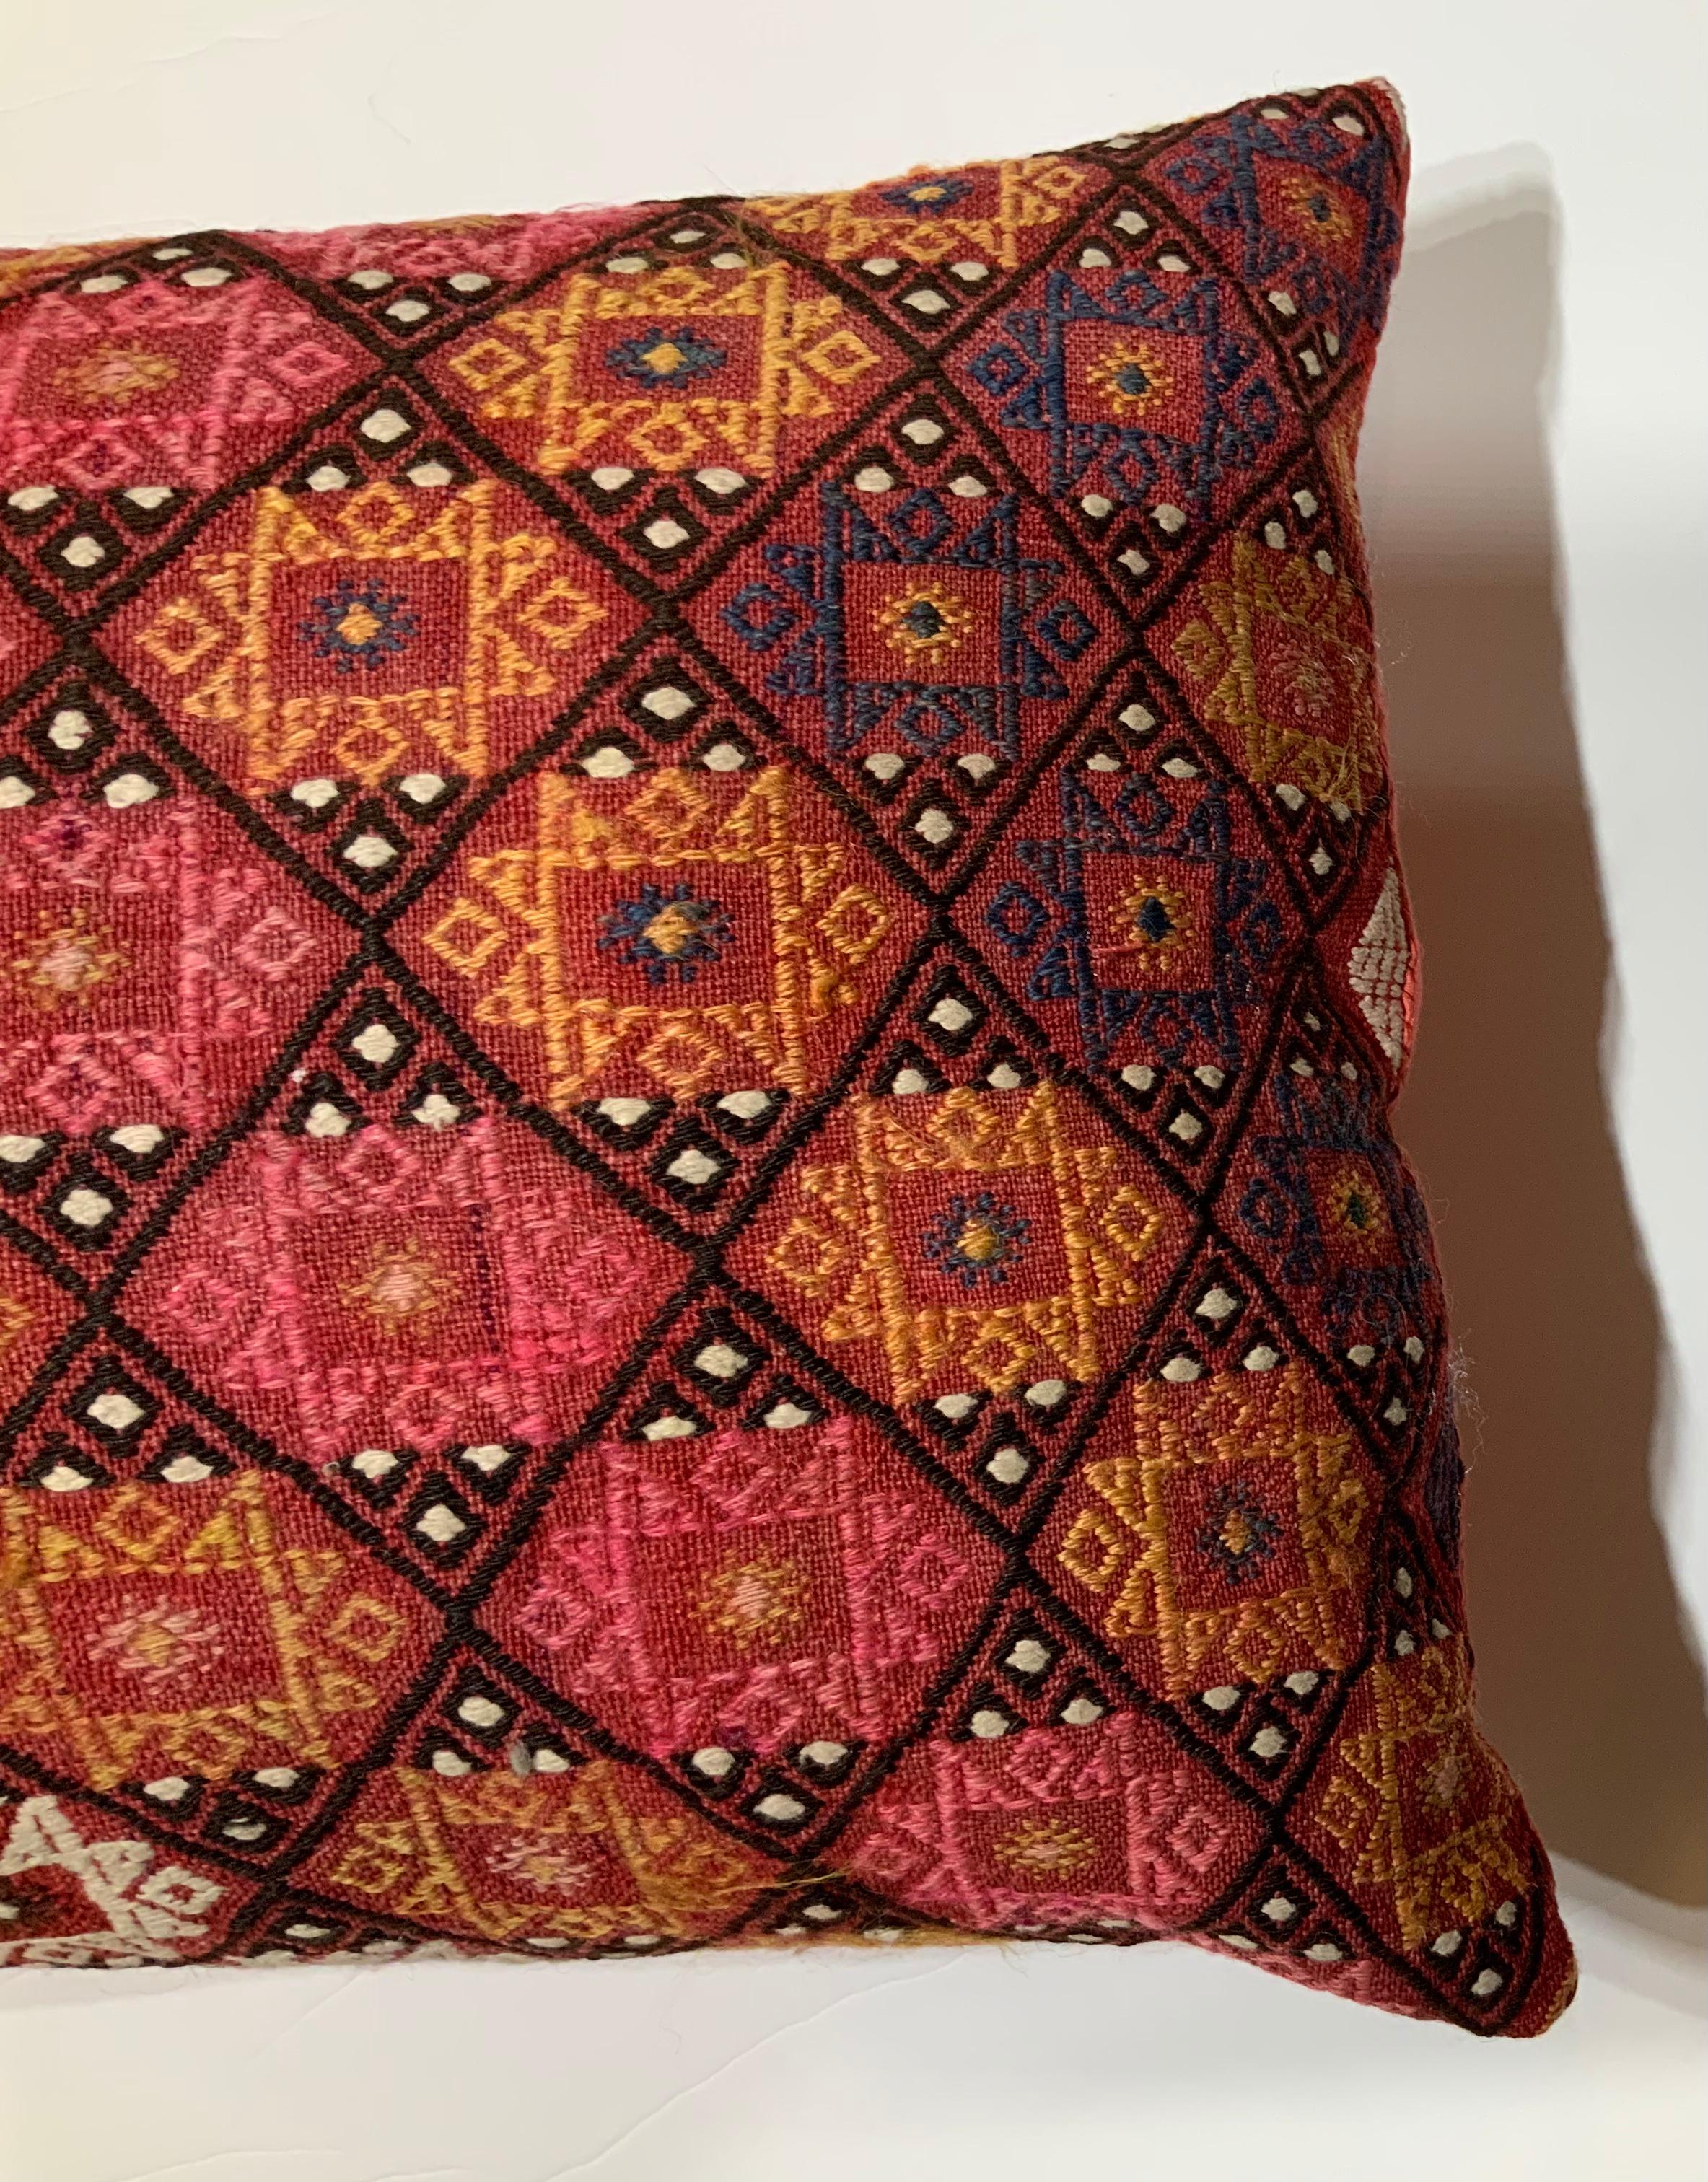 Single Vintage Hand Embroidery Pillow In Good Condition For Sale In Delray Beach, FL